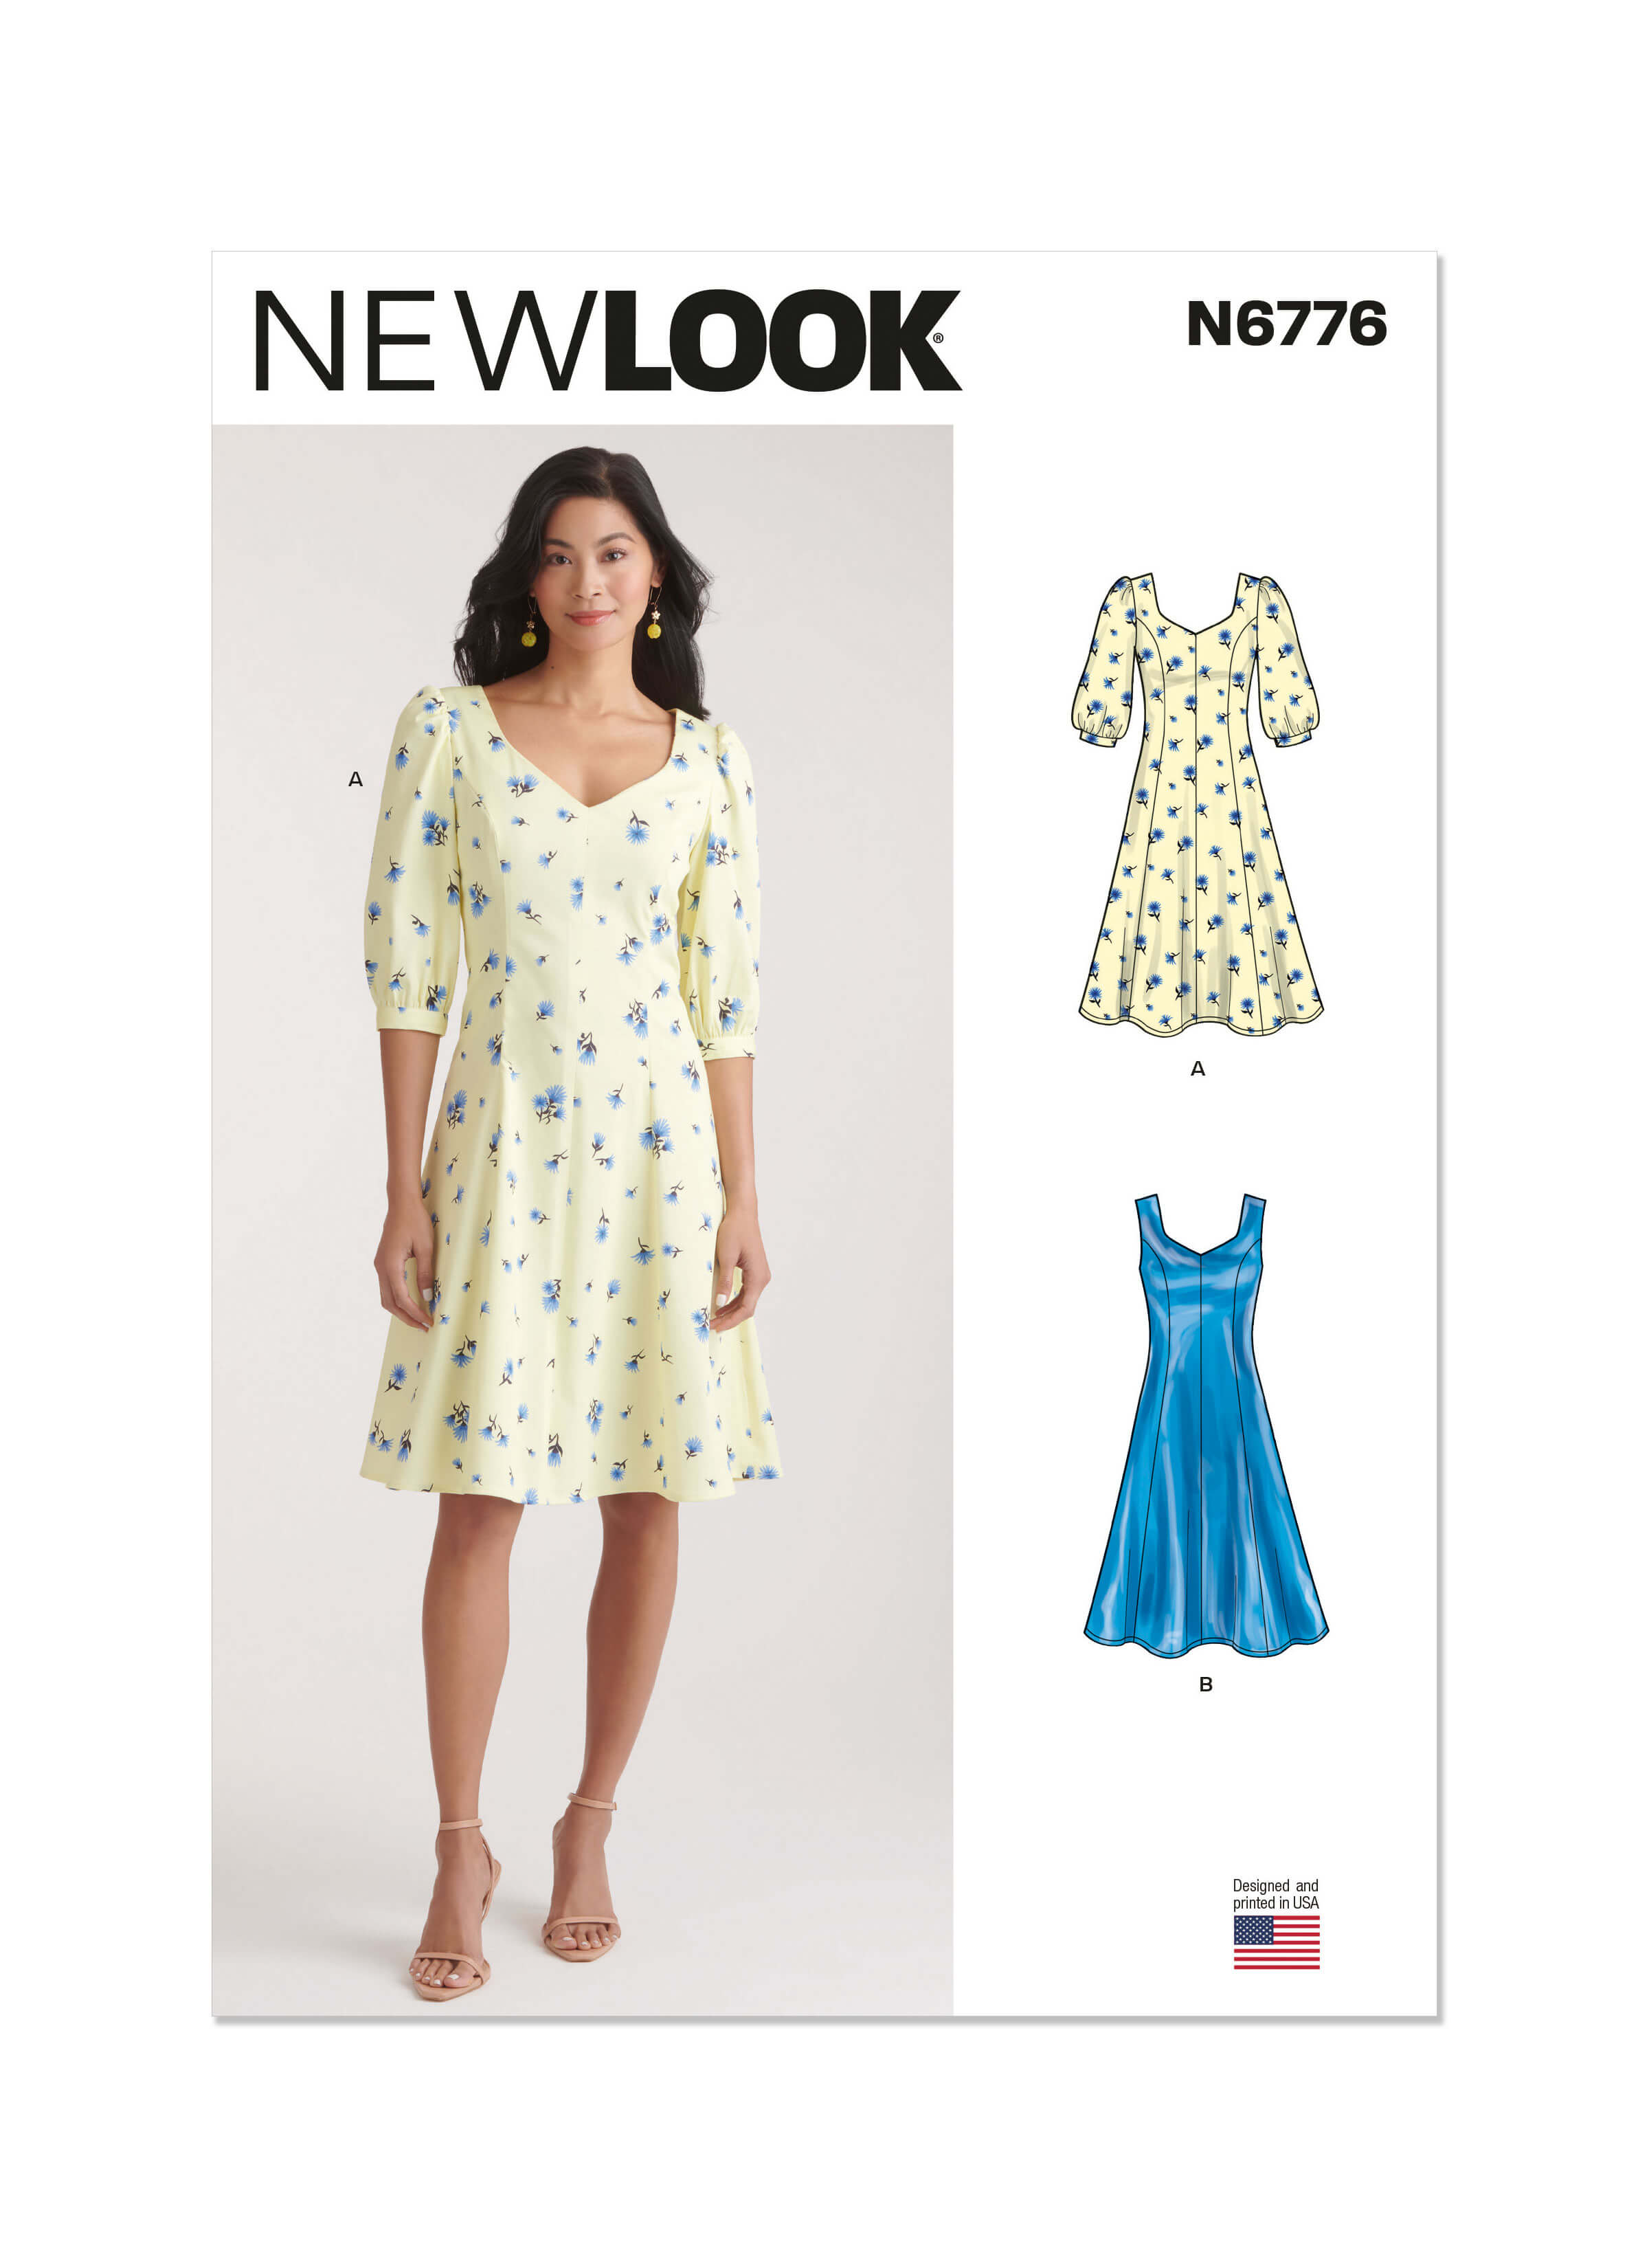 New Look Sewing Pattern N6776 Misses' Dress With Sleeve Variations